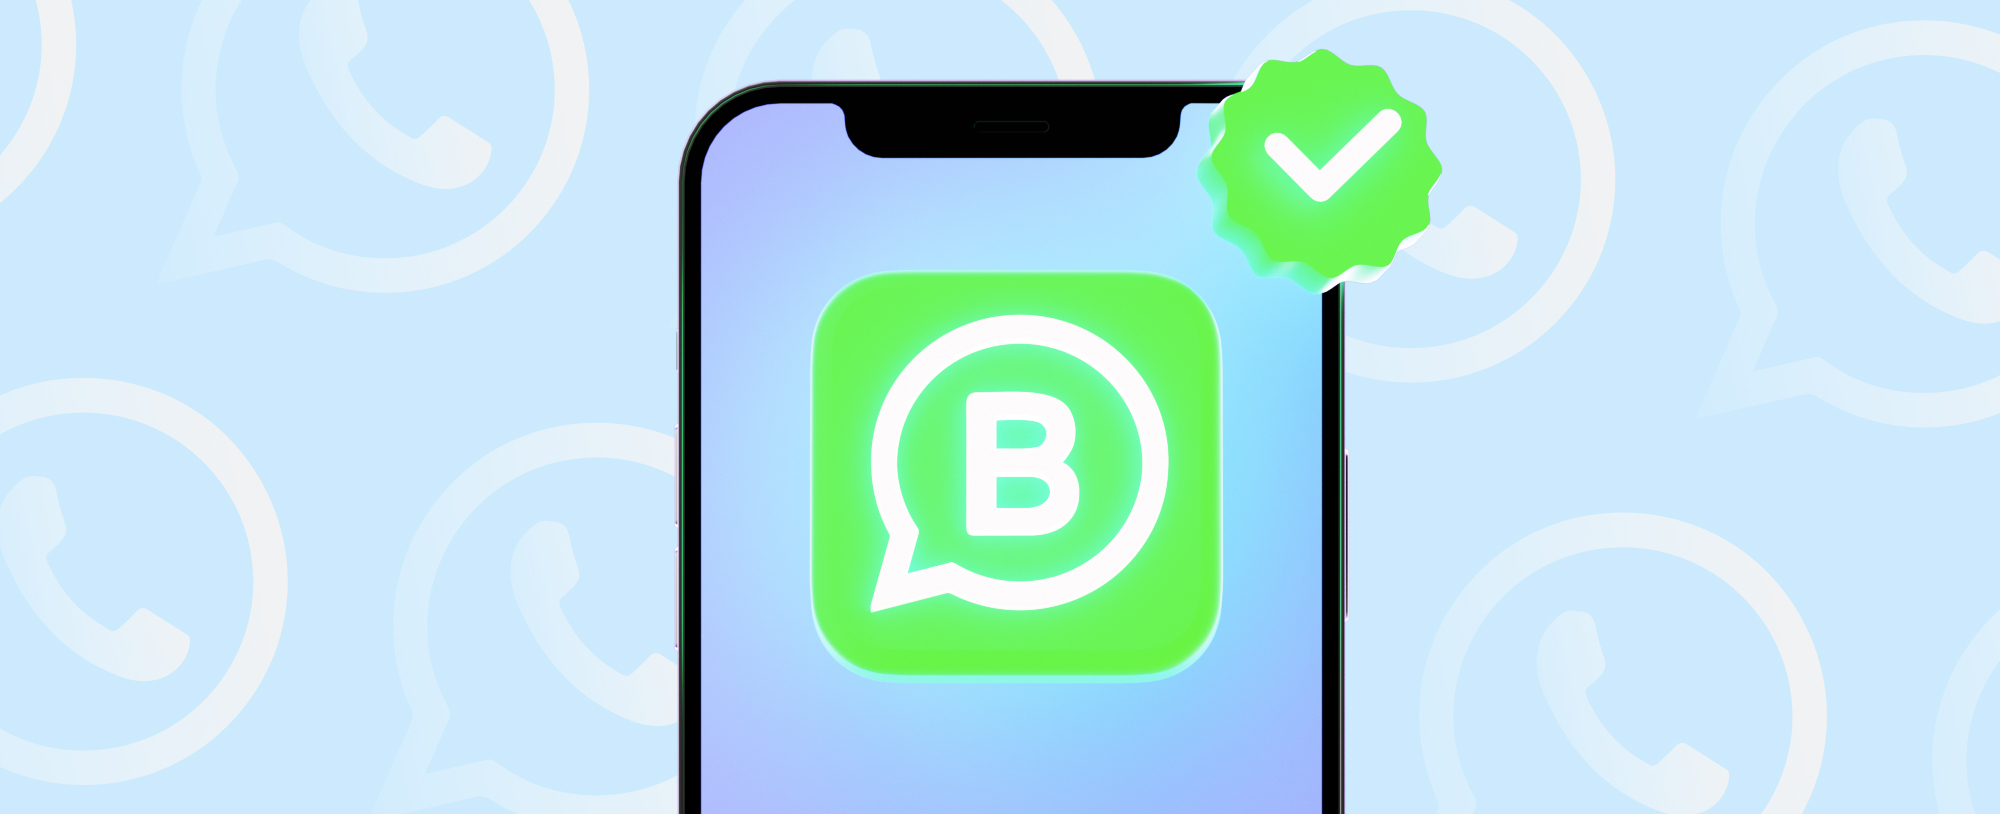 Creating a WhatsApp Business Account: A Guide for DTC eCommerce Brands